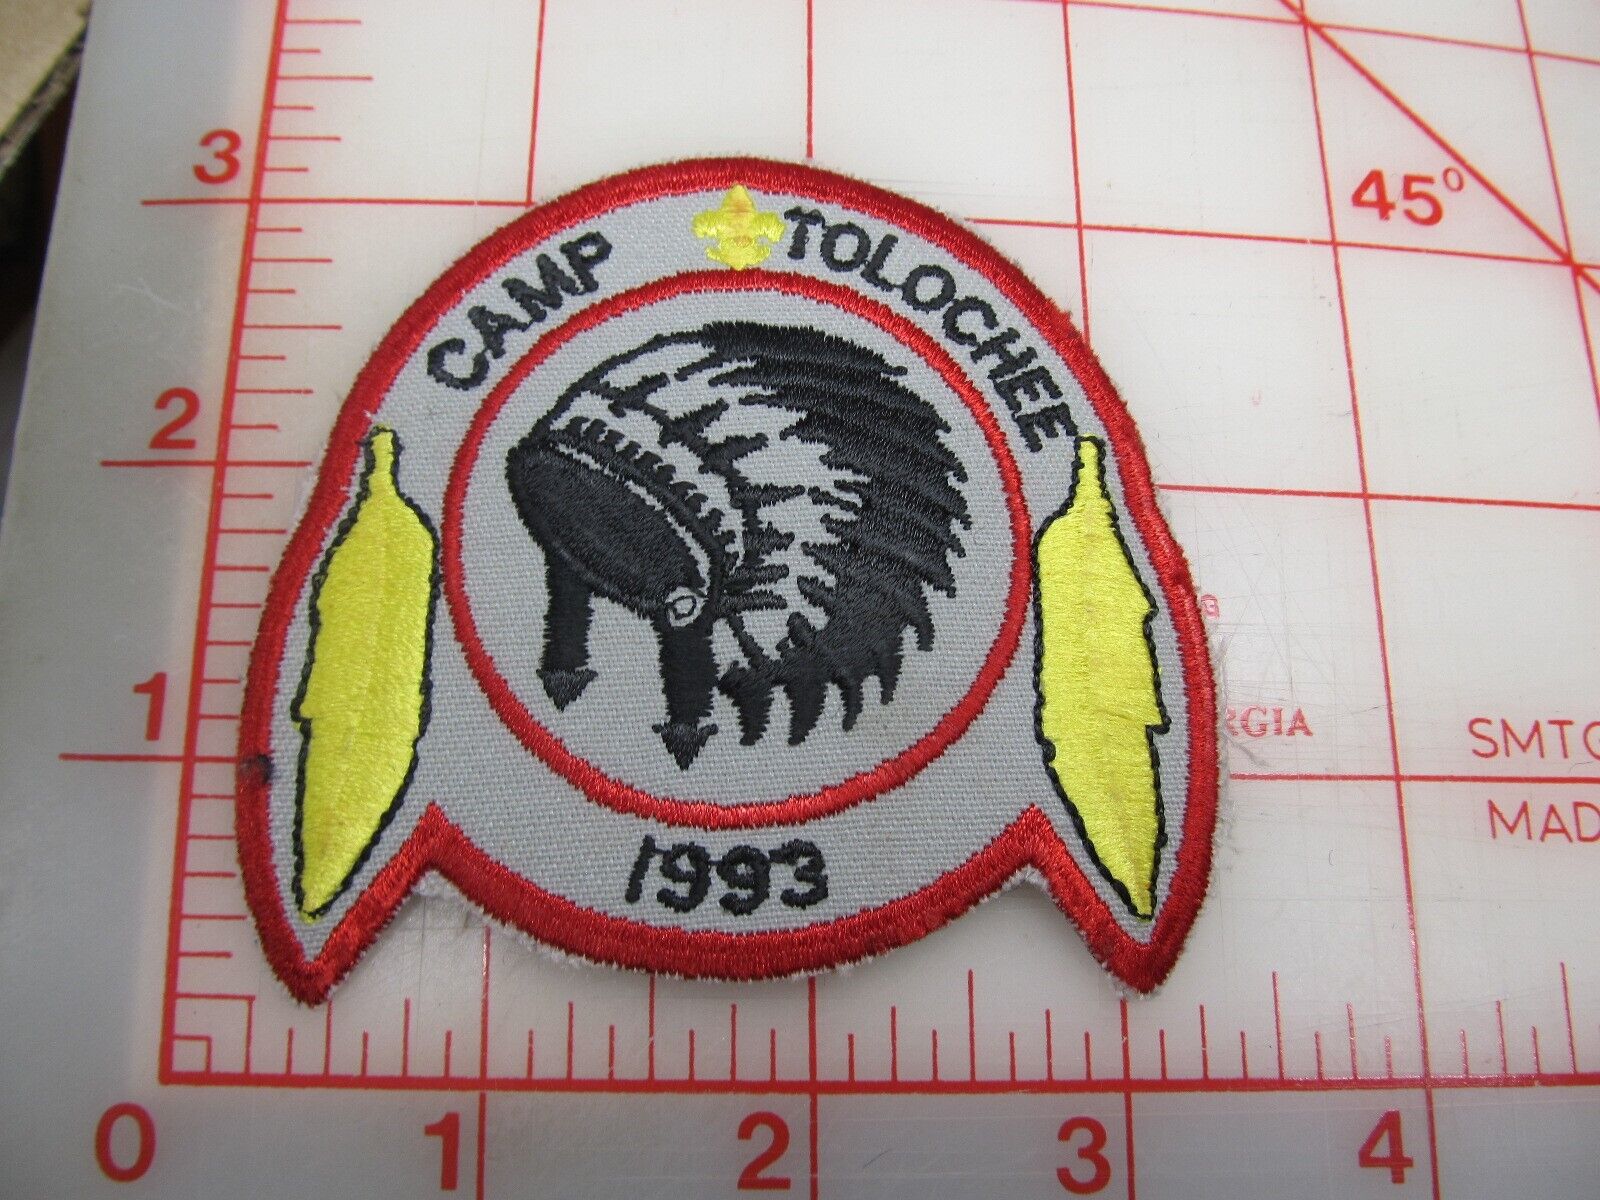  Camp Tolochee collectible 1993 camp patch (mR)